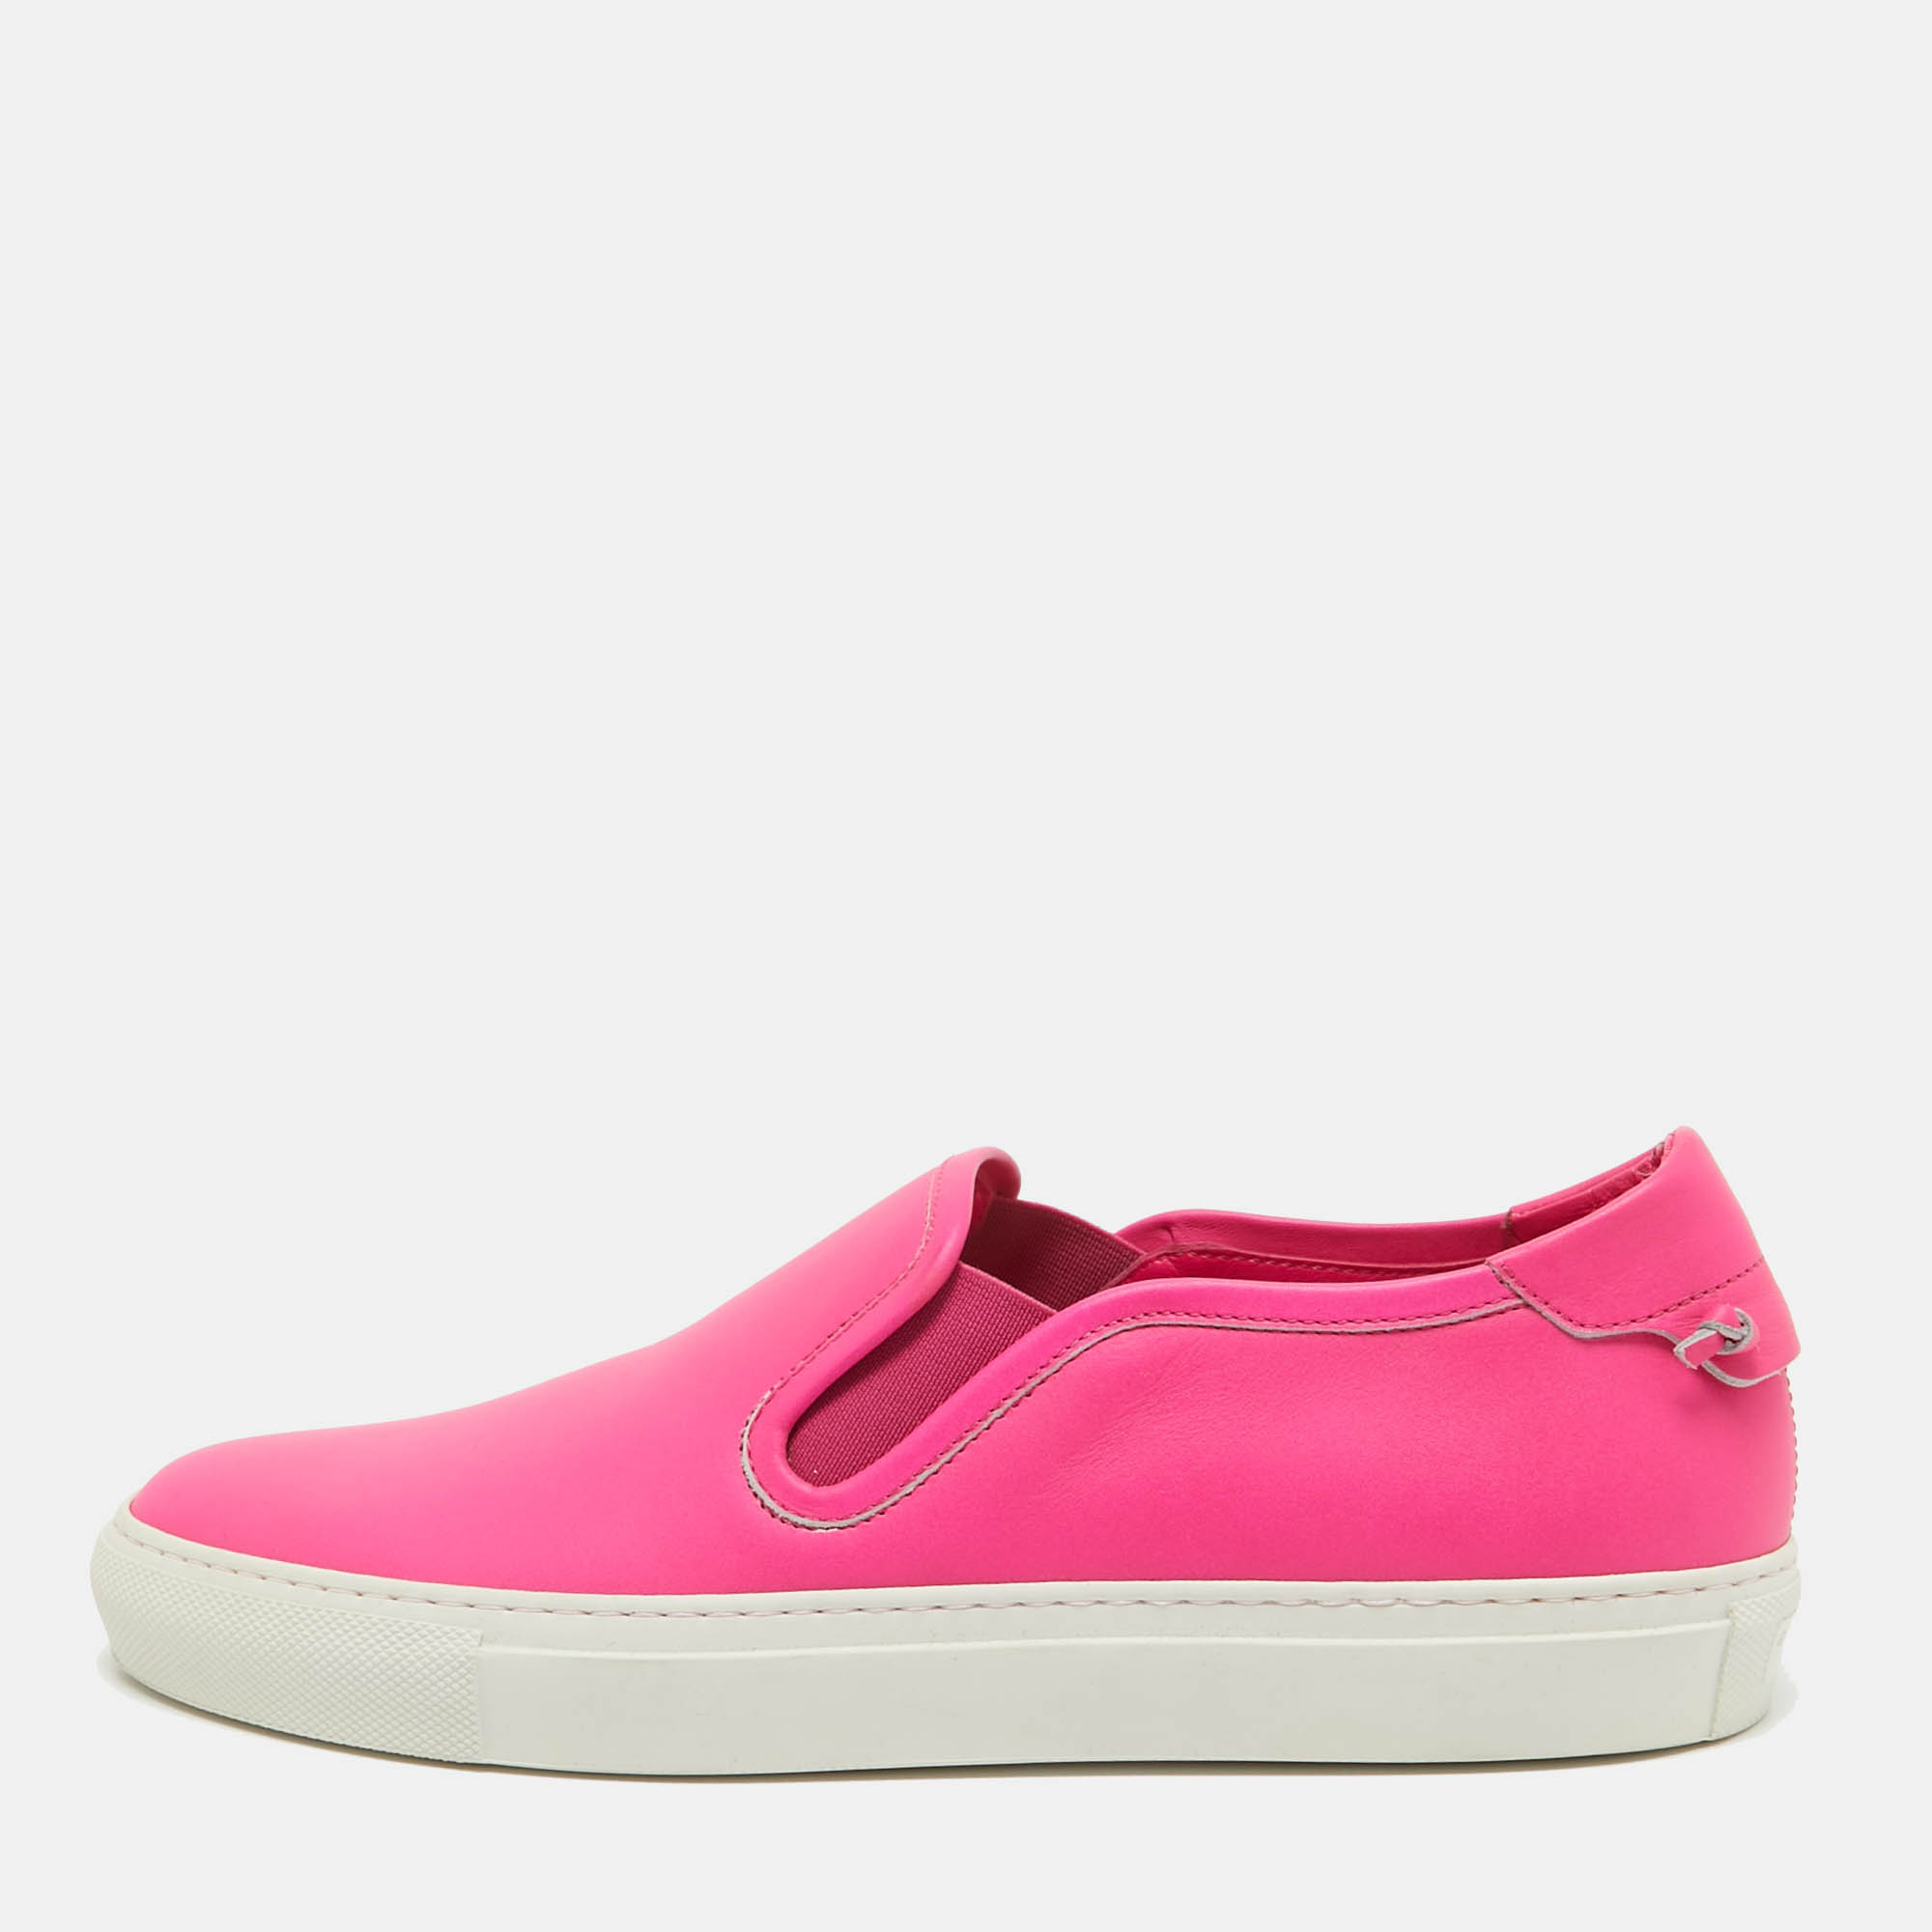 Pre-owned Givenchy Pink Leather Slip On Trainers Size 40